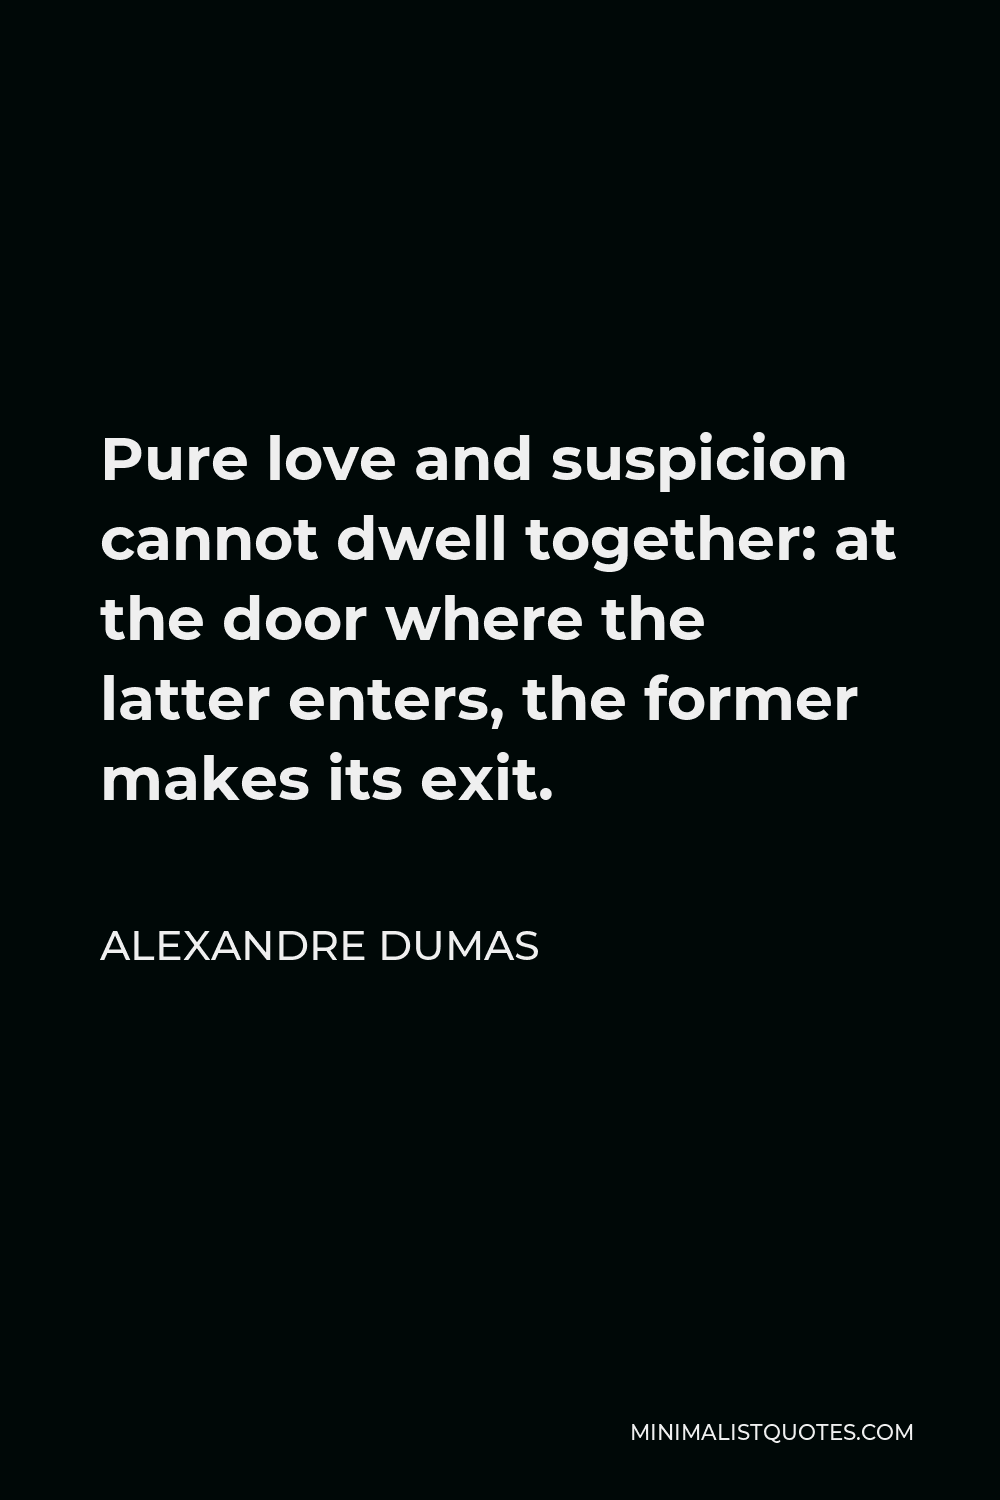 Alexandre Dumas Quote - Pure love and suspicion cannot dwell together: at the door where the latter enters, the former makes its exit.